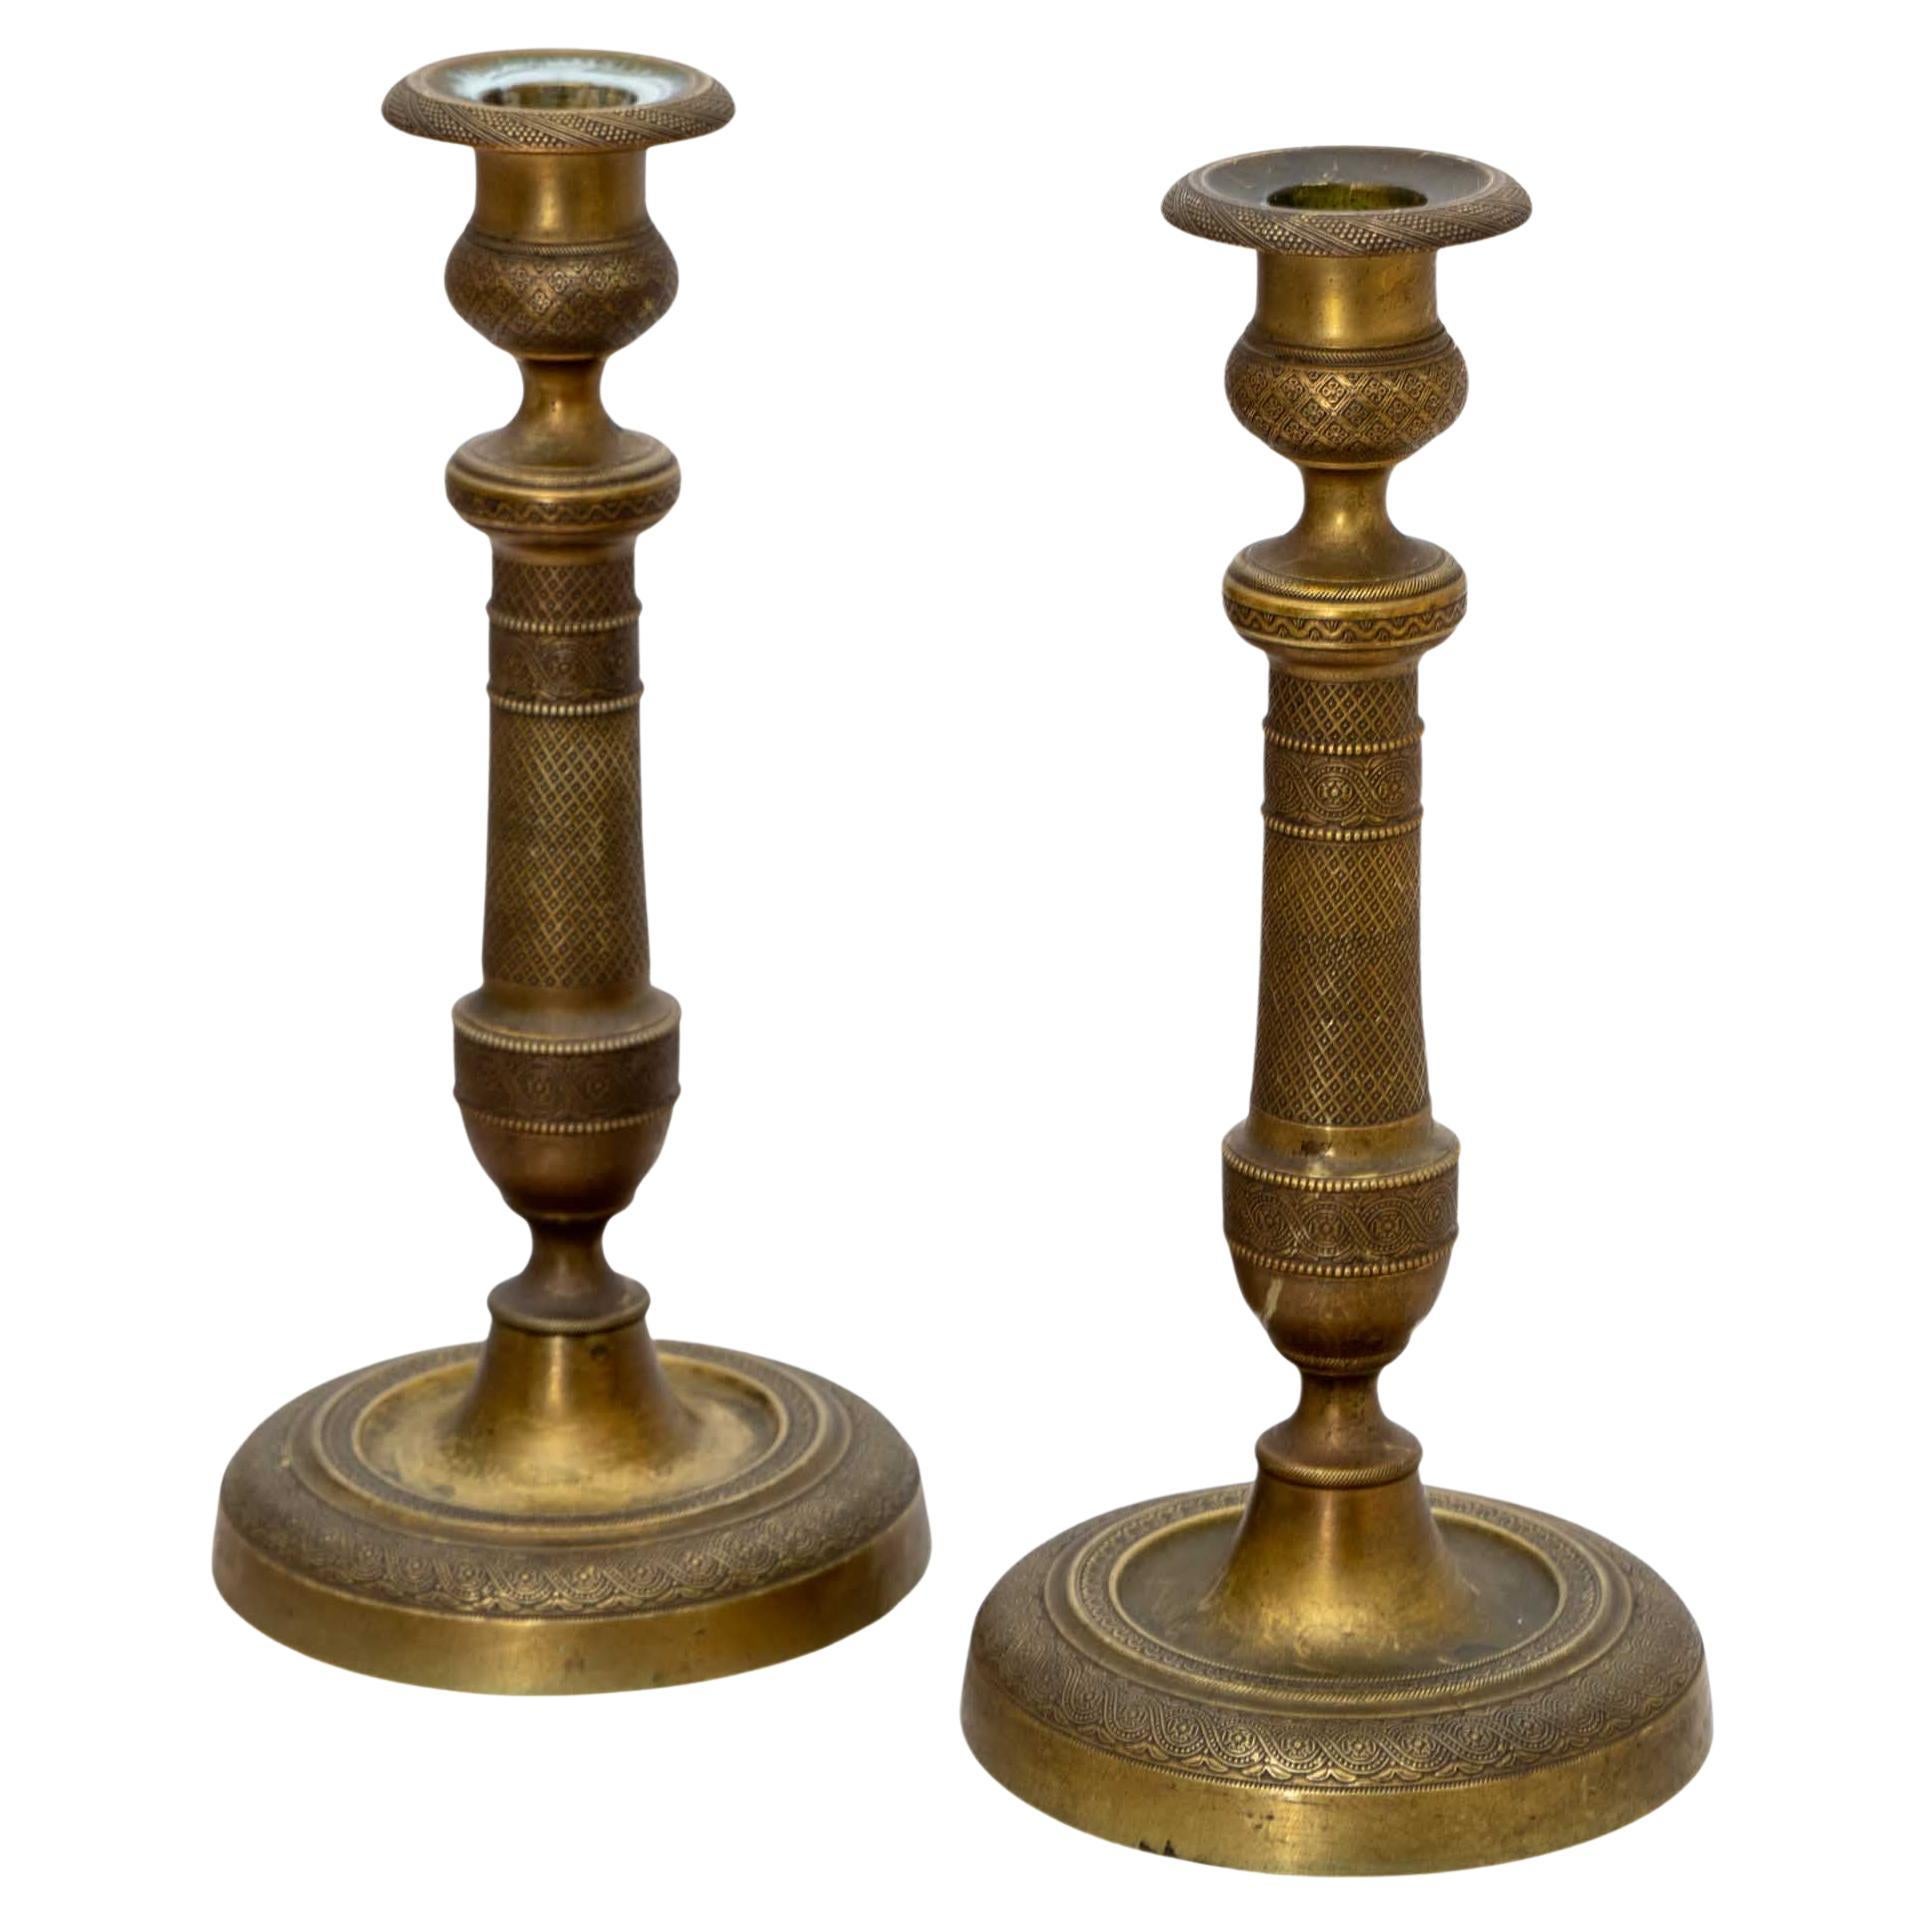 Antique Brass Adjustable Push Up Pair of Candleholders, 19th